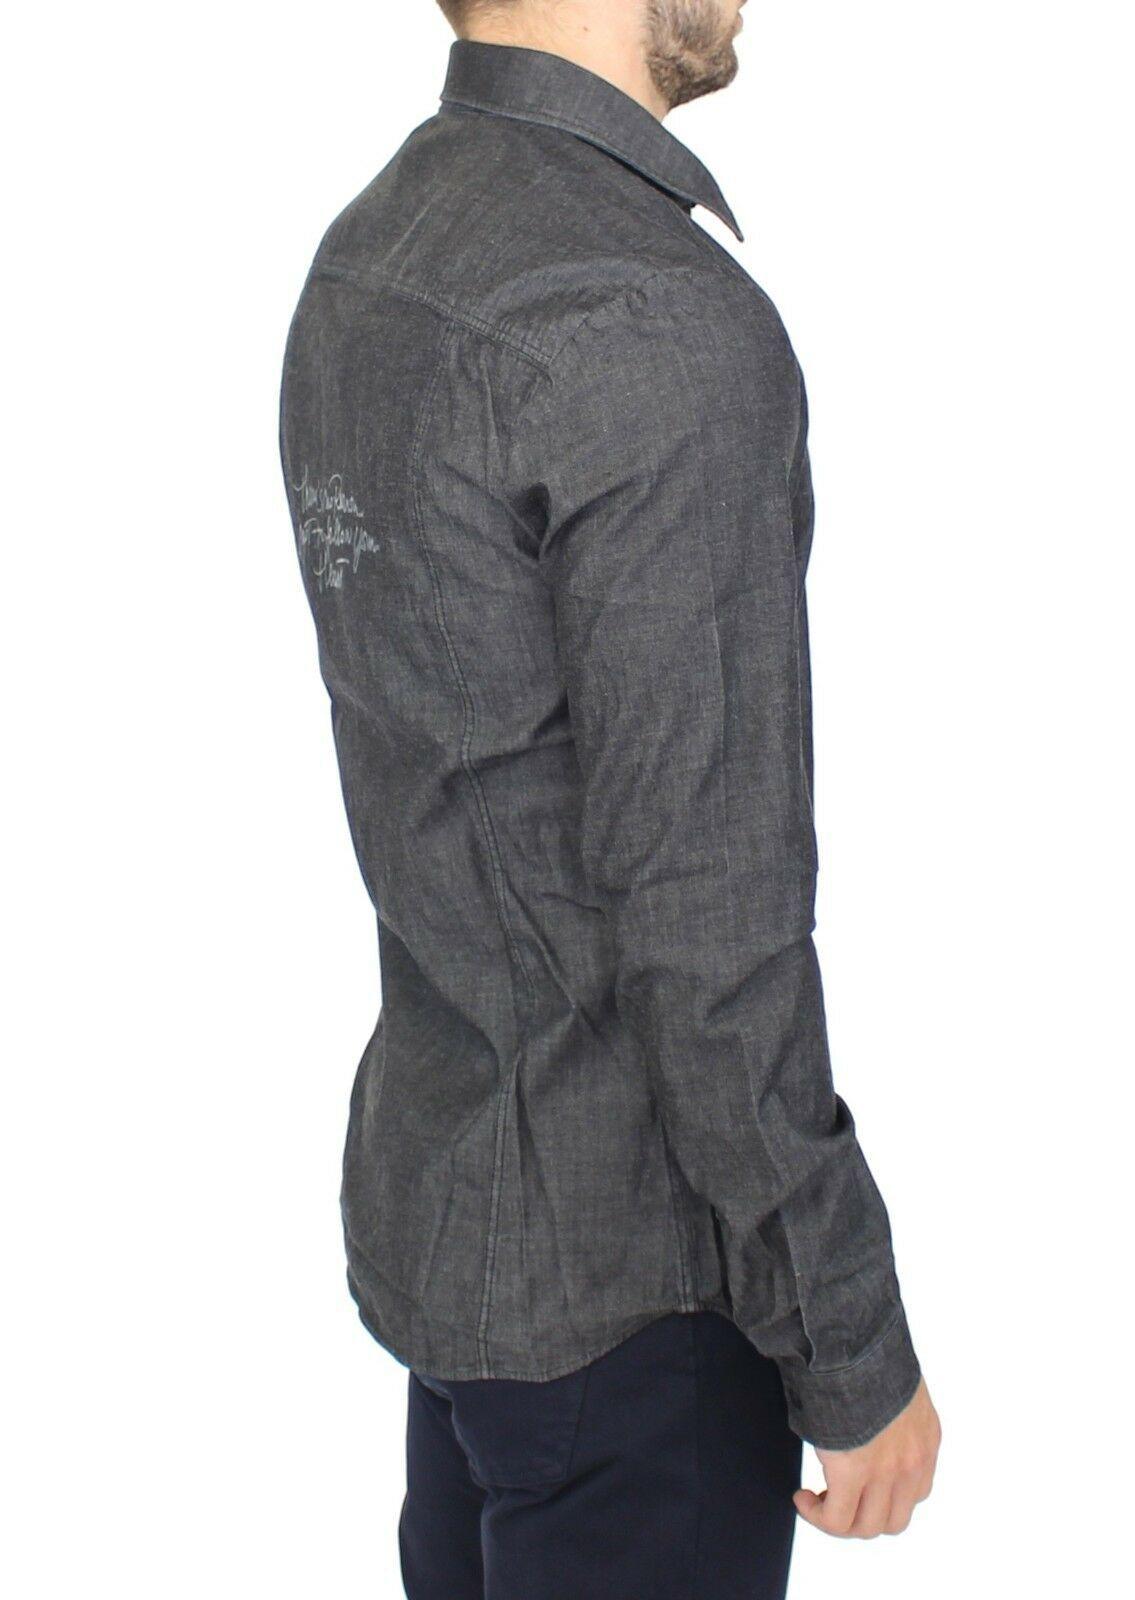 Denim Jeans Cotton Casual Gray Stretch Shirt - Designed by Ermanno Scervino Available to Buy at a Discounted Price on Moon Behind The Hill Online Designer Discount Store